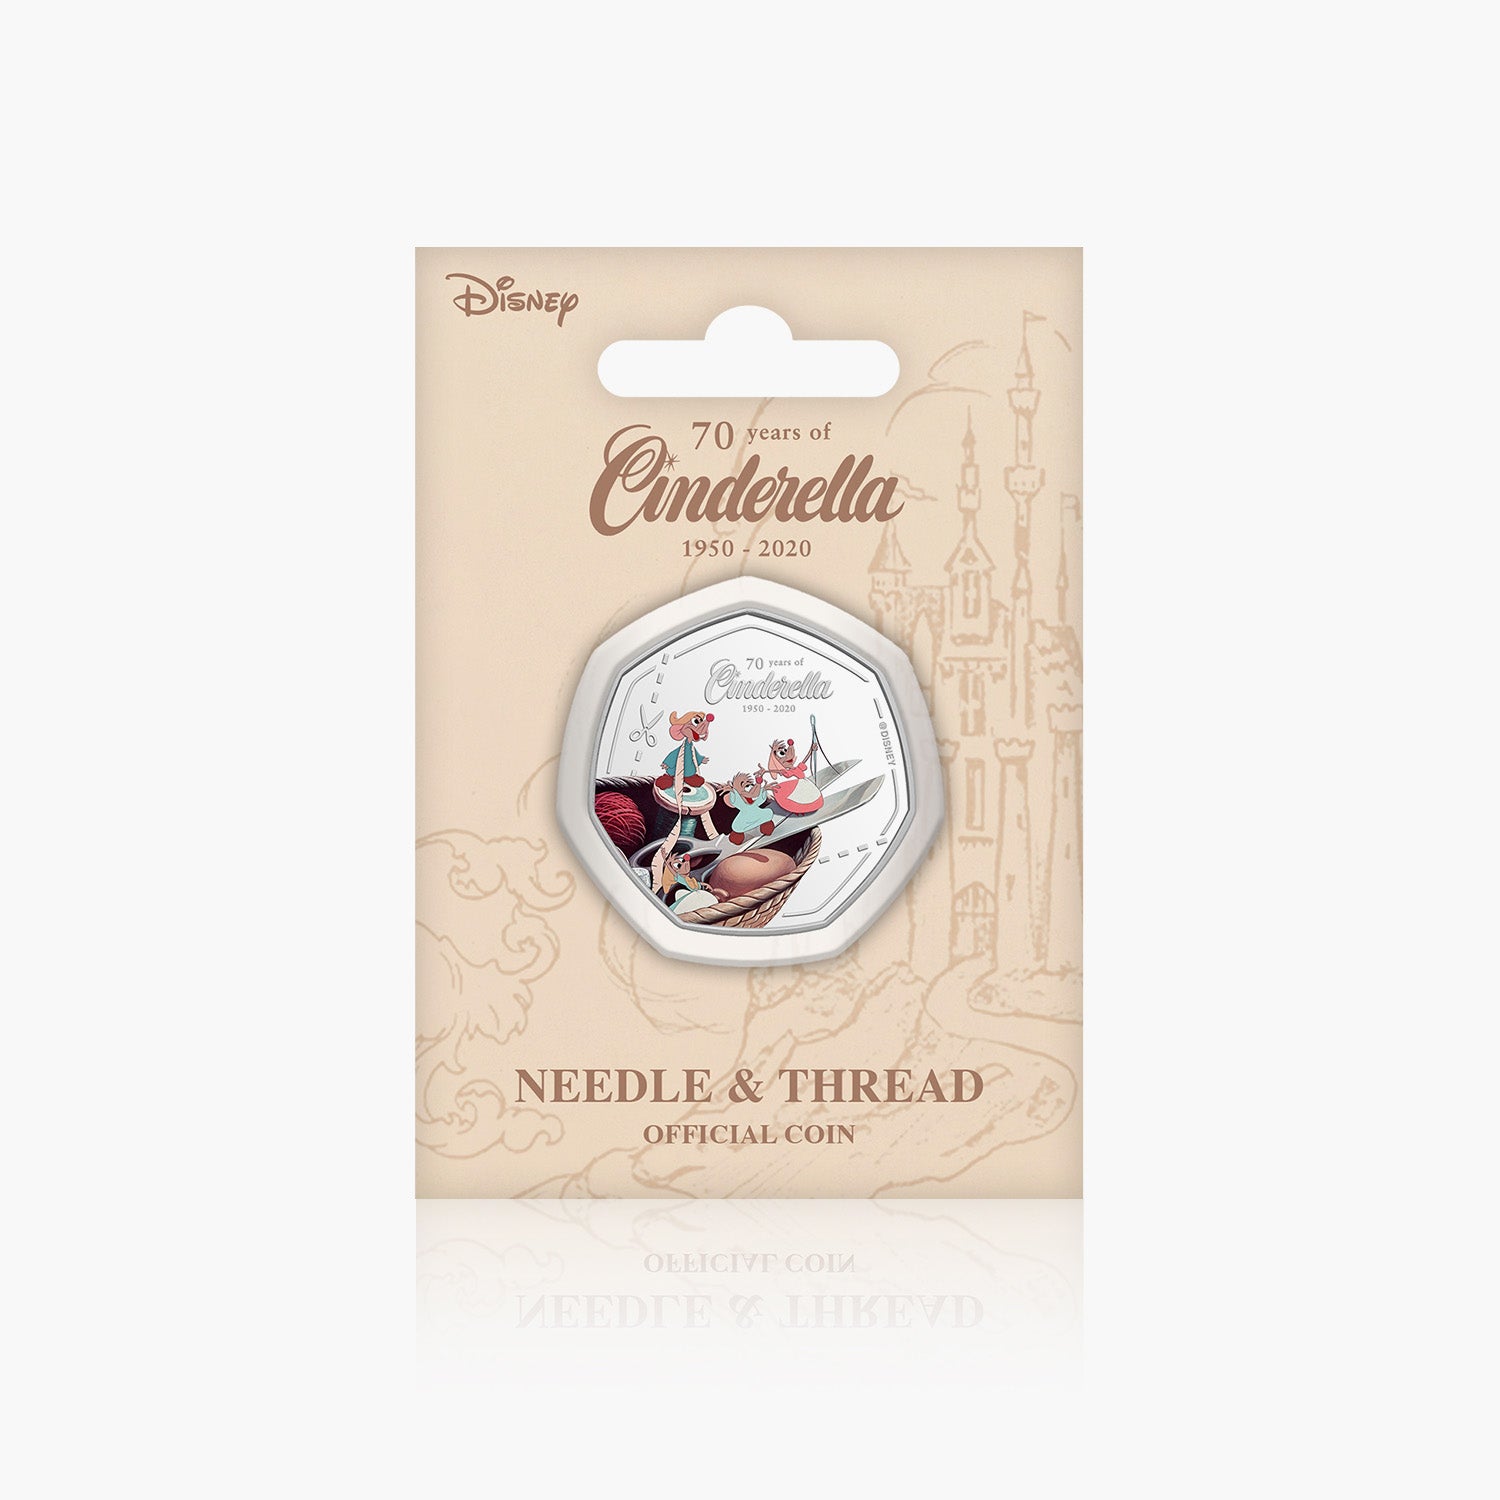 Needle & Thread Silver Plated Coin